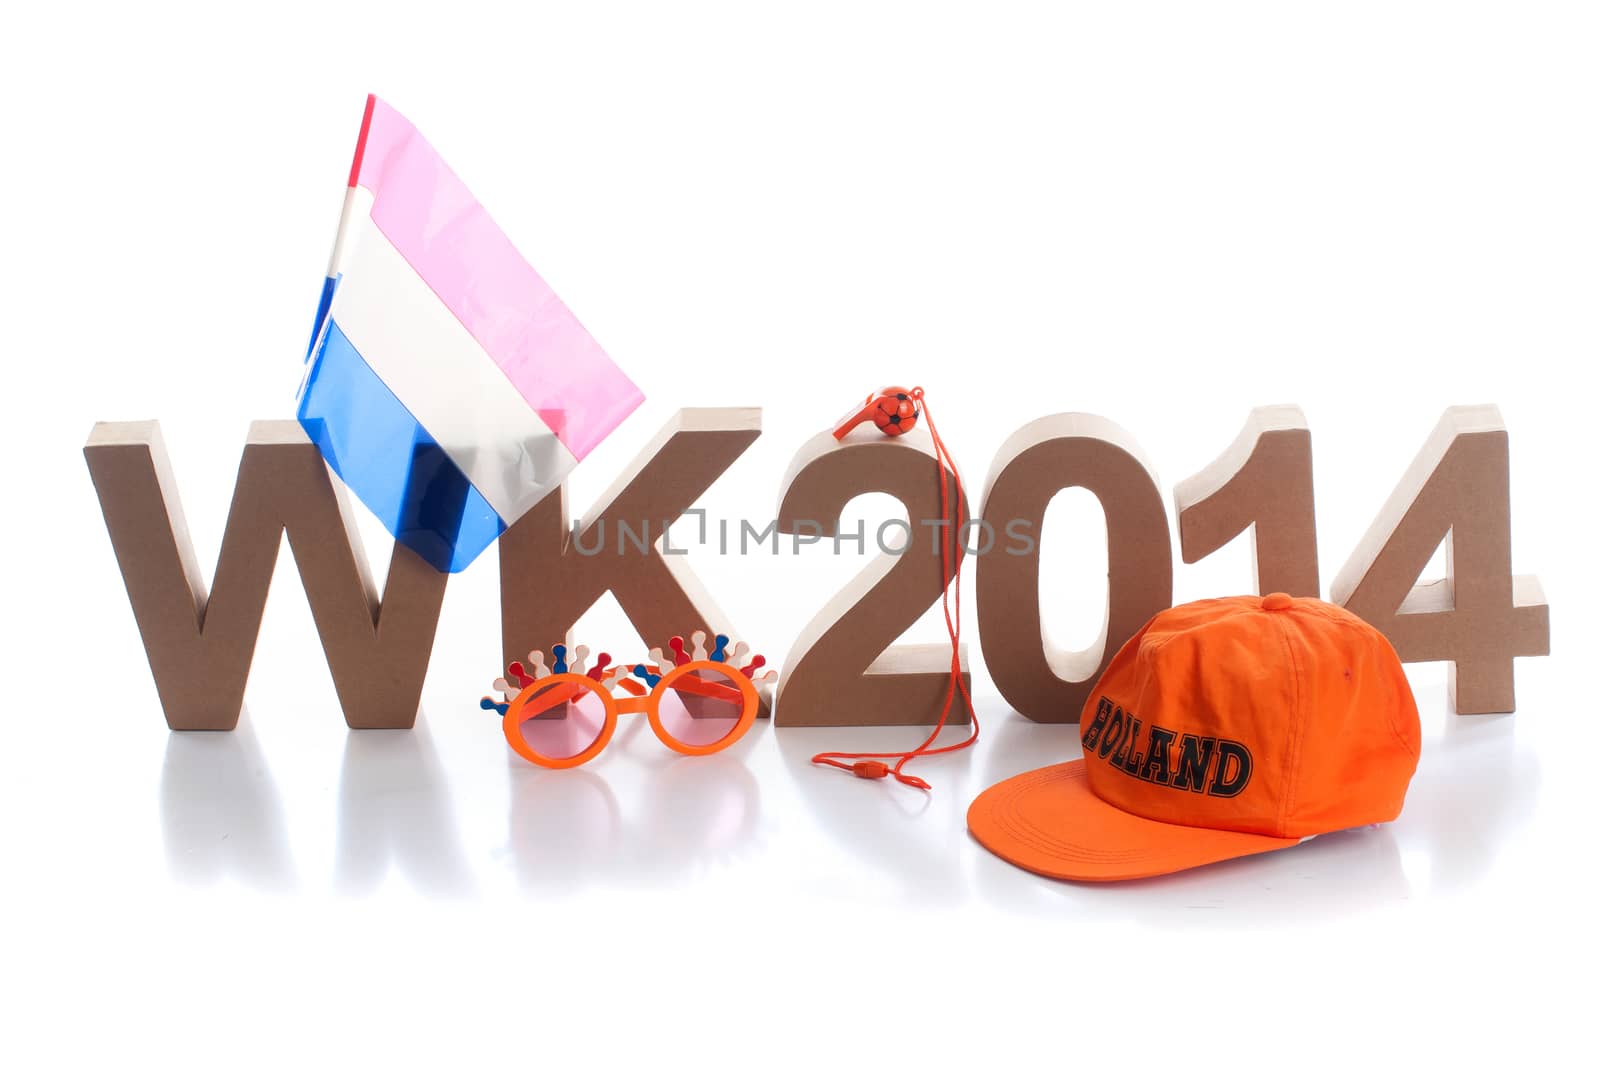 The world championship in Brazil, fanstuff for the Netherlands